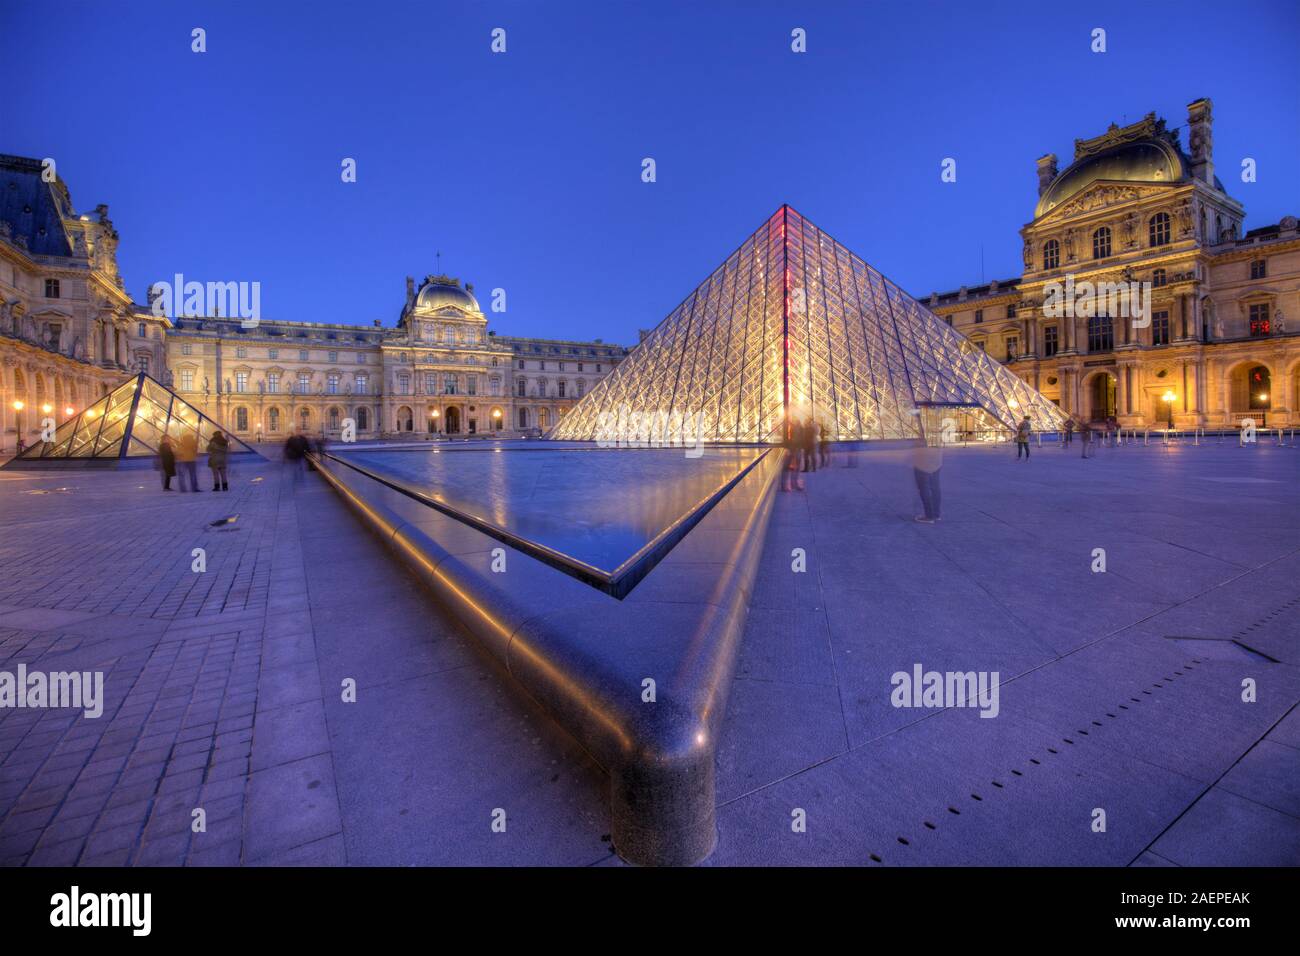 The Louvre Pyramid and Palace, Paris, France Stock Photo